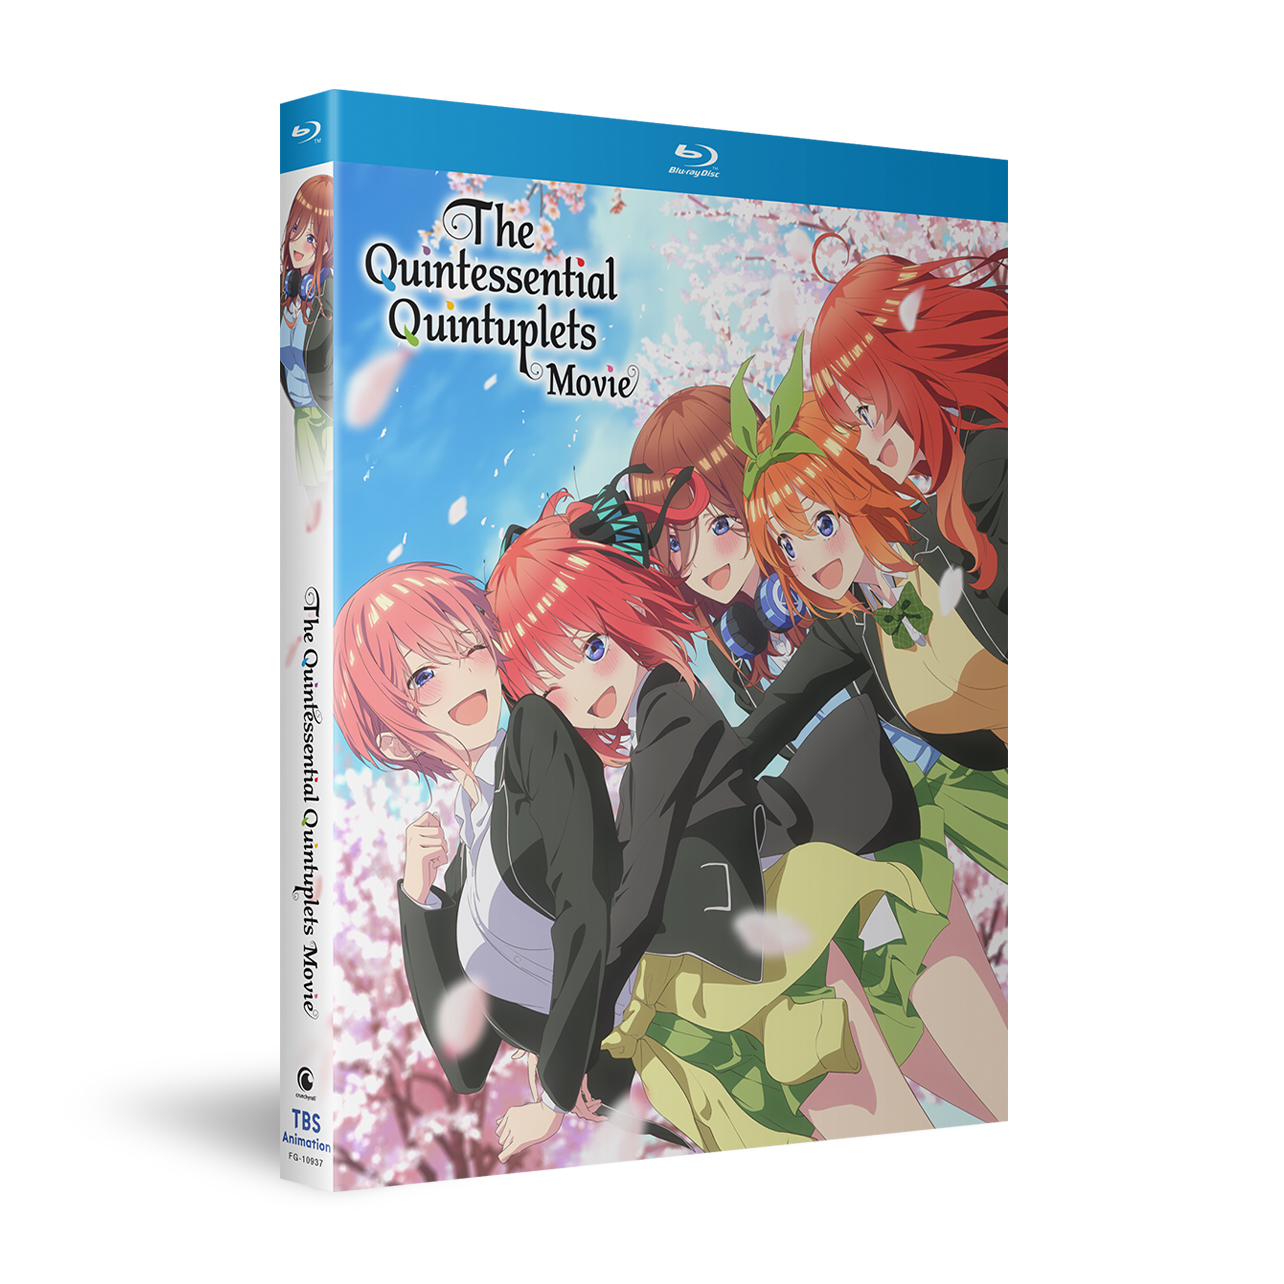 The Quintessential Quintuplets Movie - Blu-ray | Crunchyroll Store